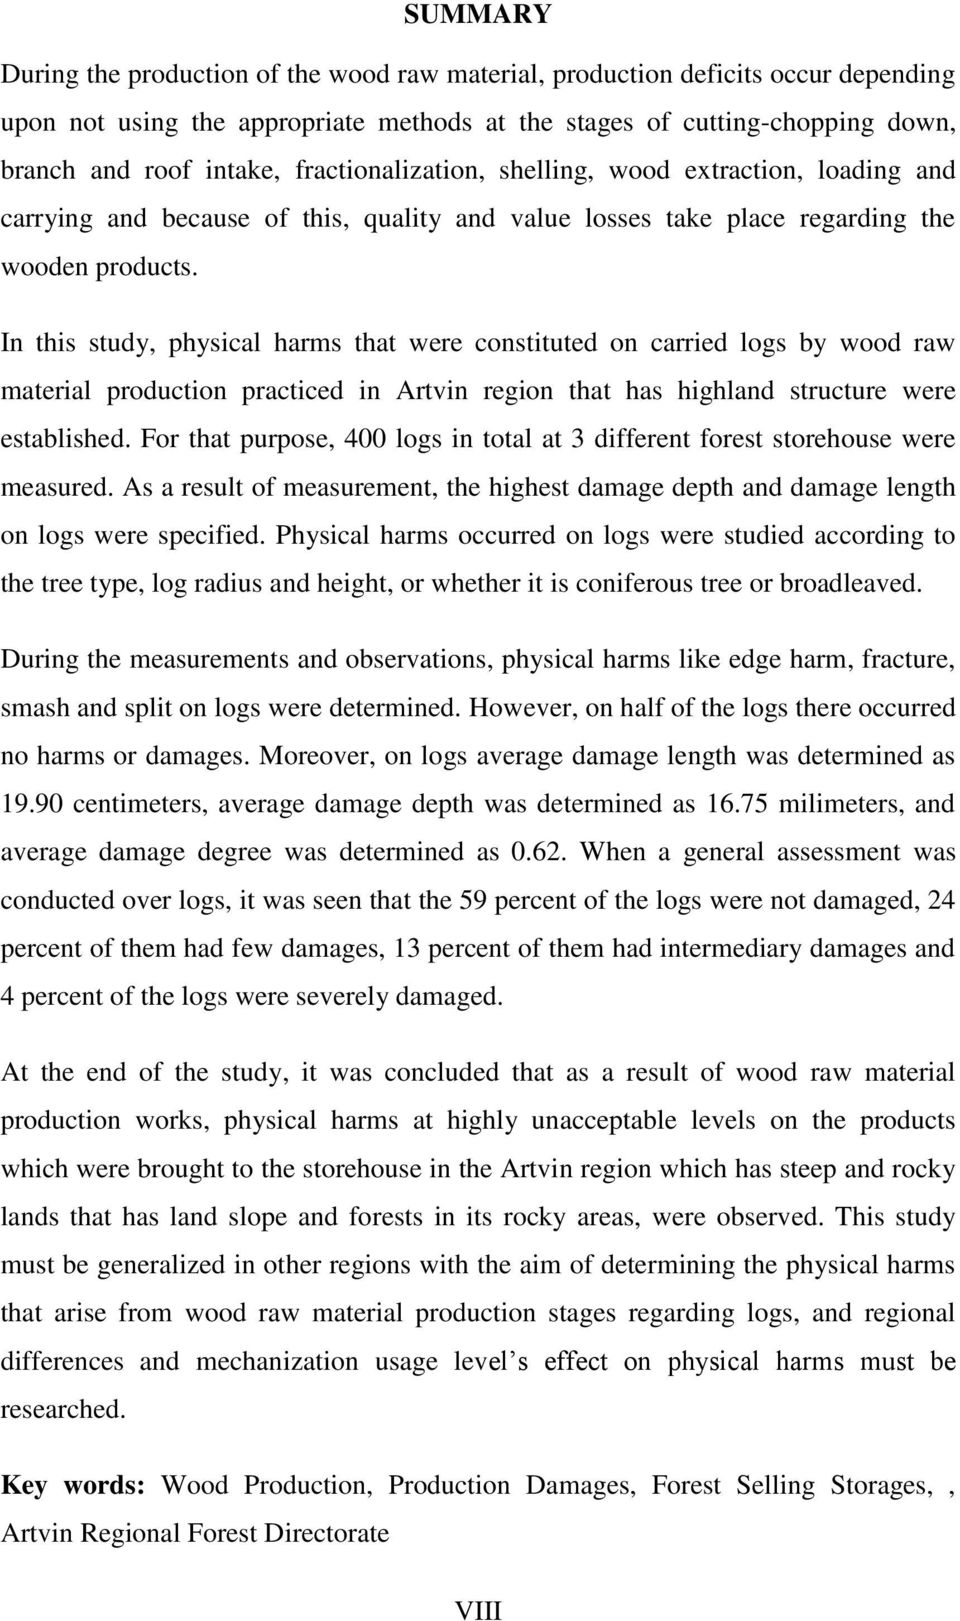 In this study, physical harms that were constituted on carried logs by wood raw material production practiced in Artvin region that has highland structure were established.